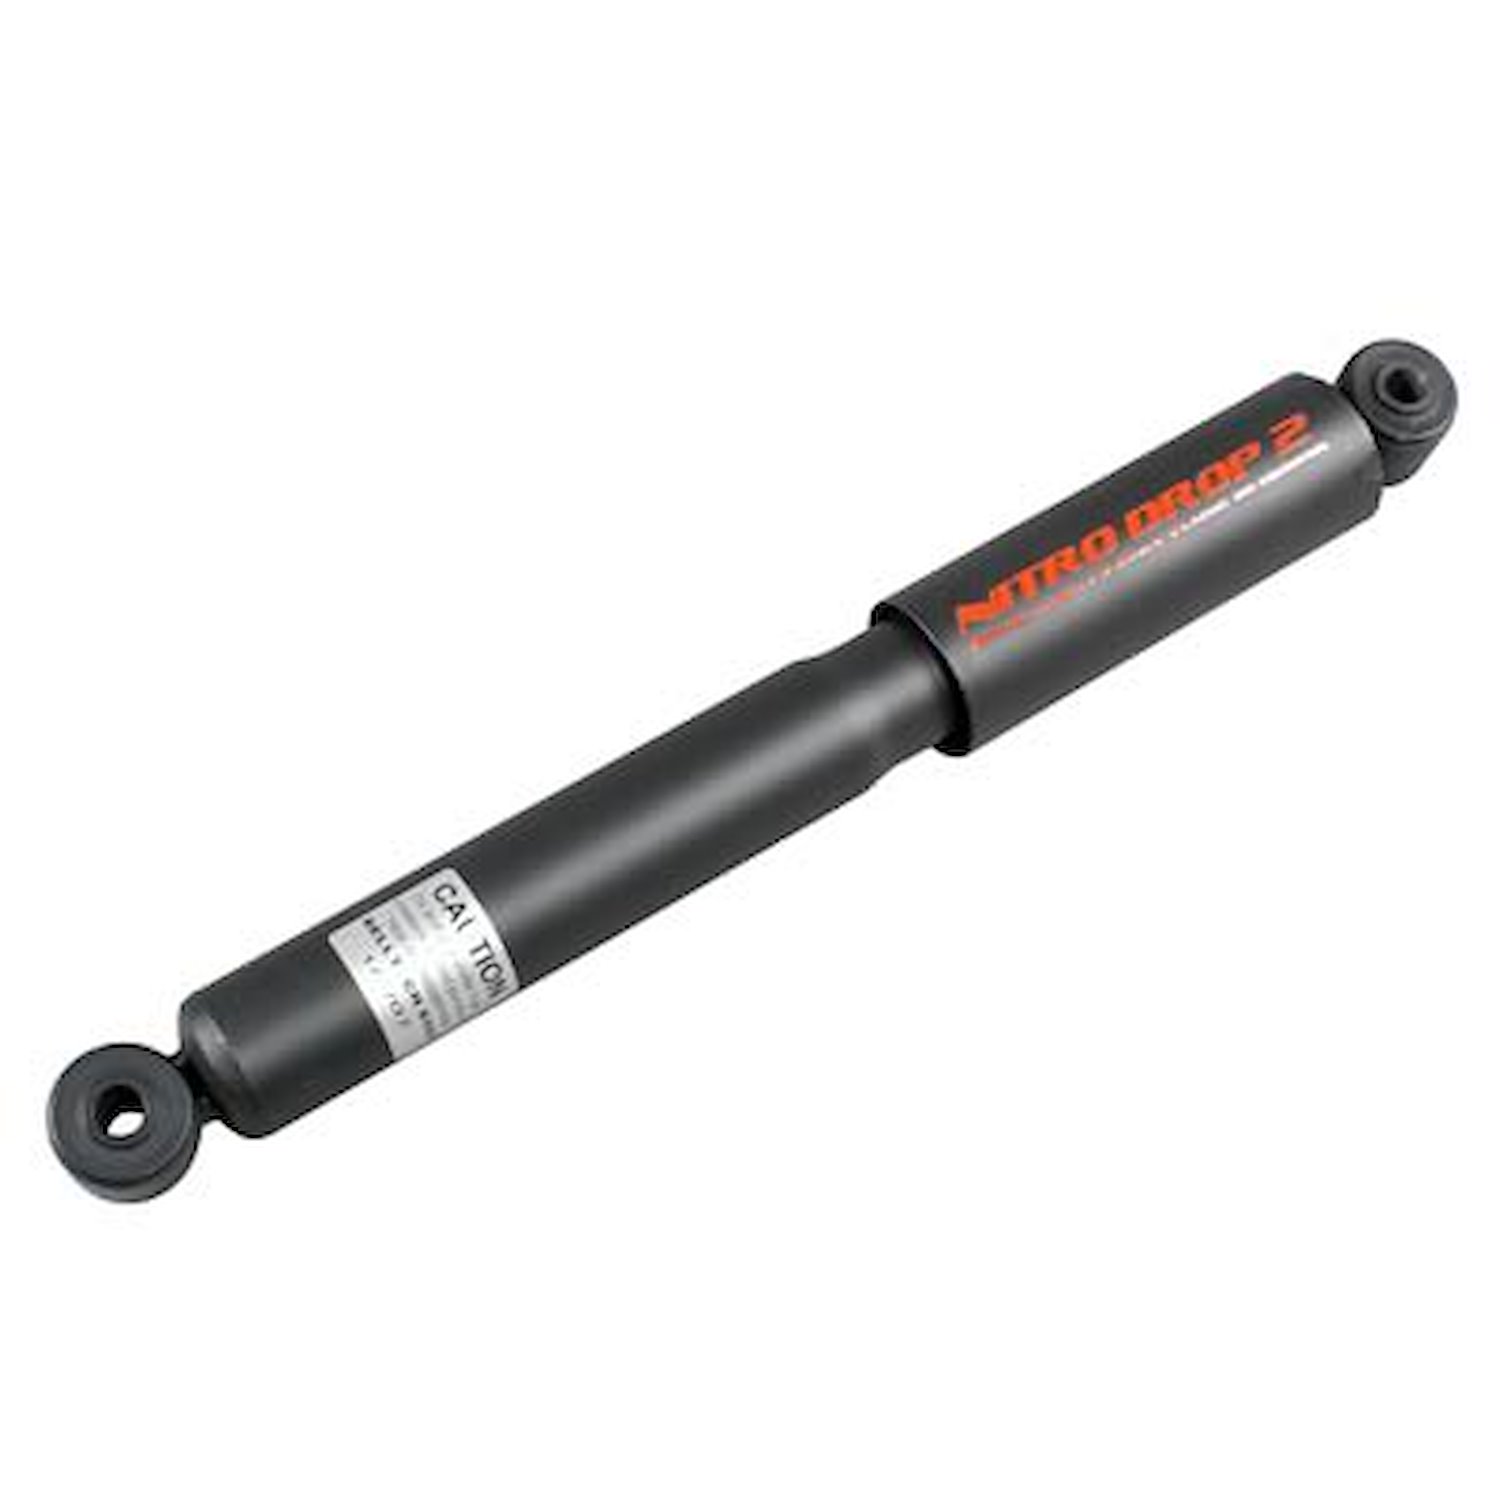 Street Performance Shock Set includes (2) 146-25005 Front Shocks and (2) 146-2208IF Rear Shocks